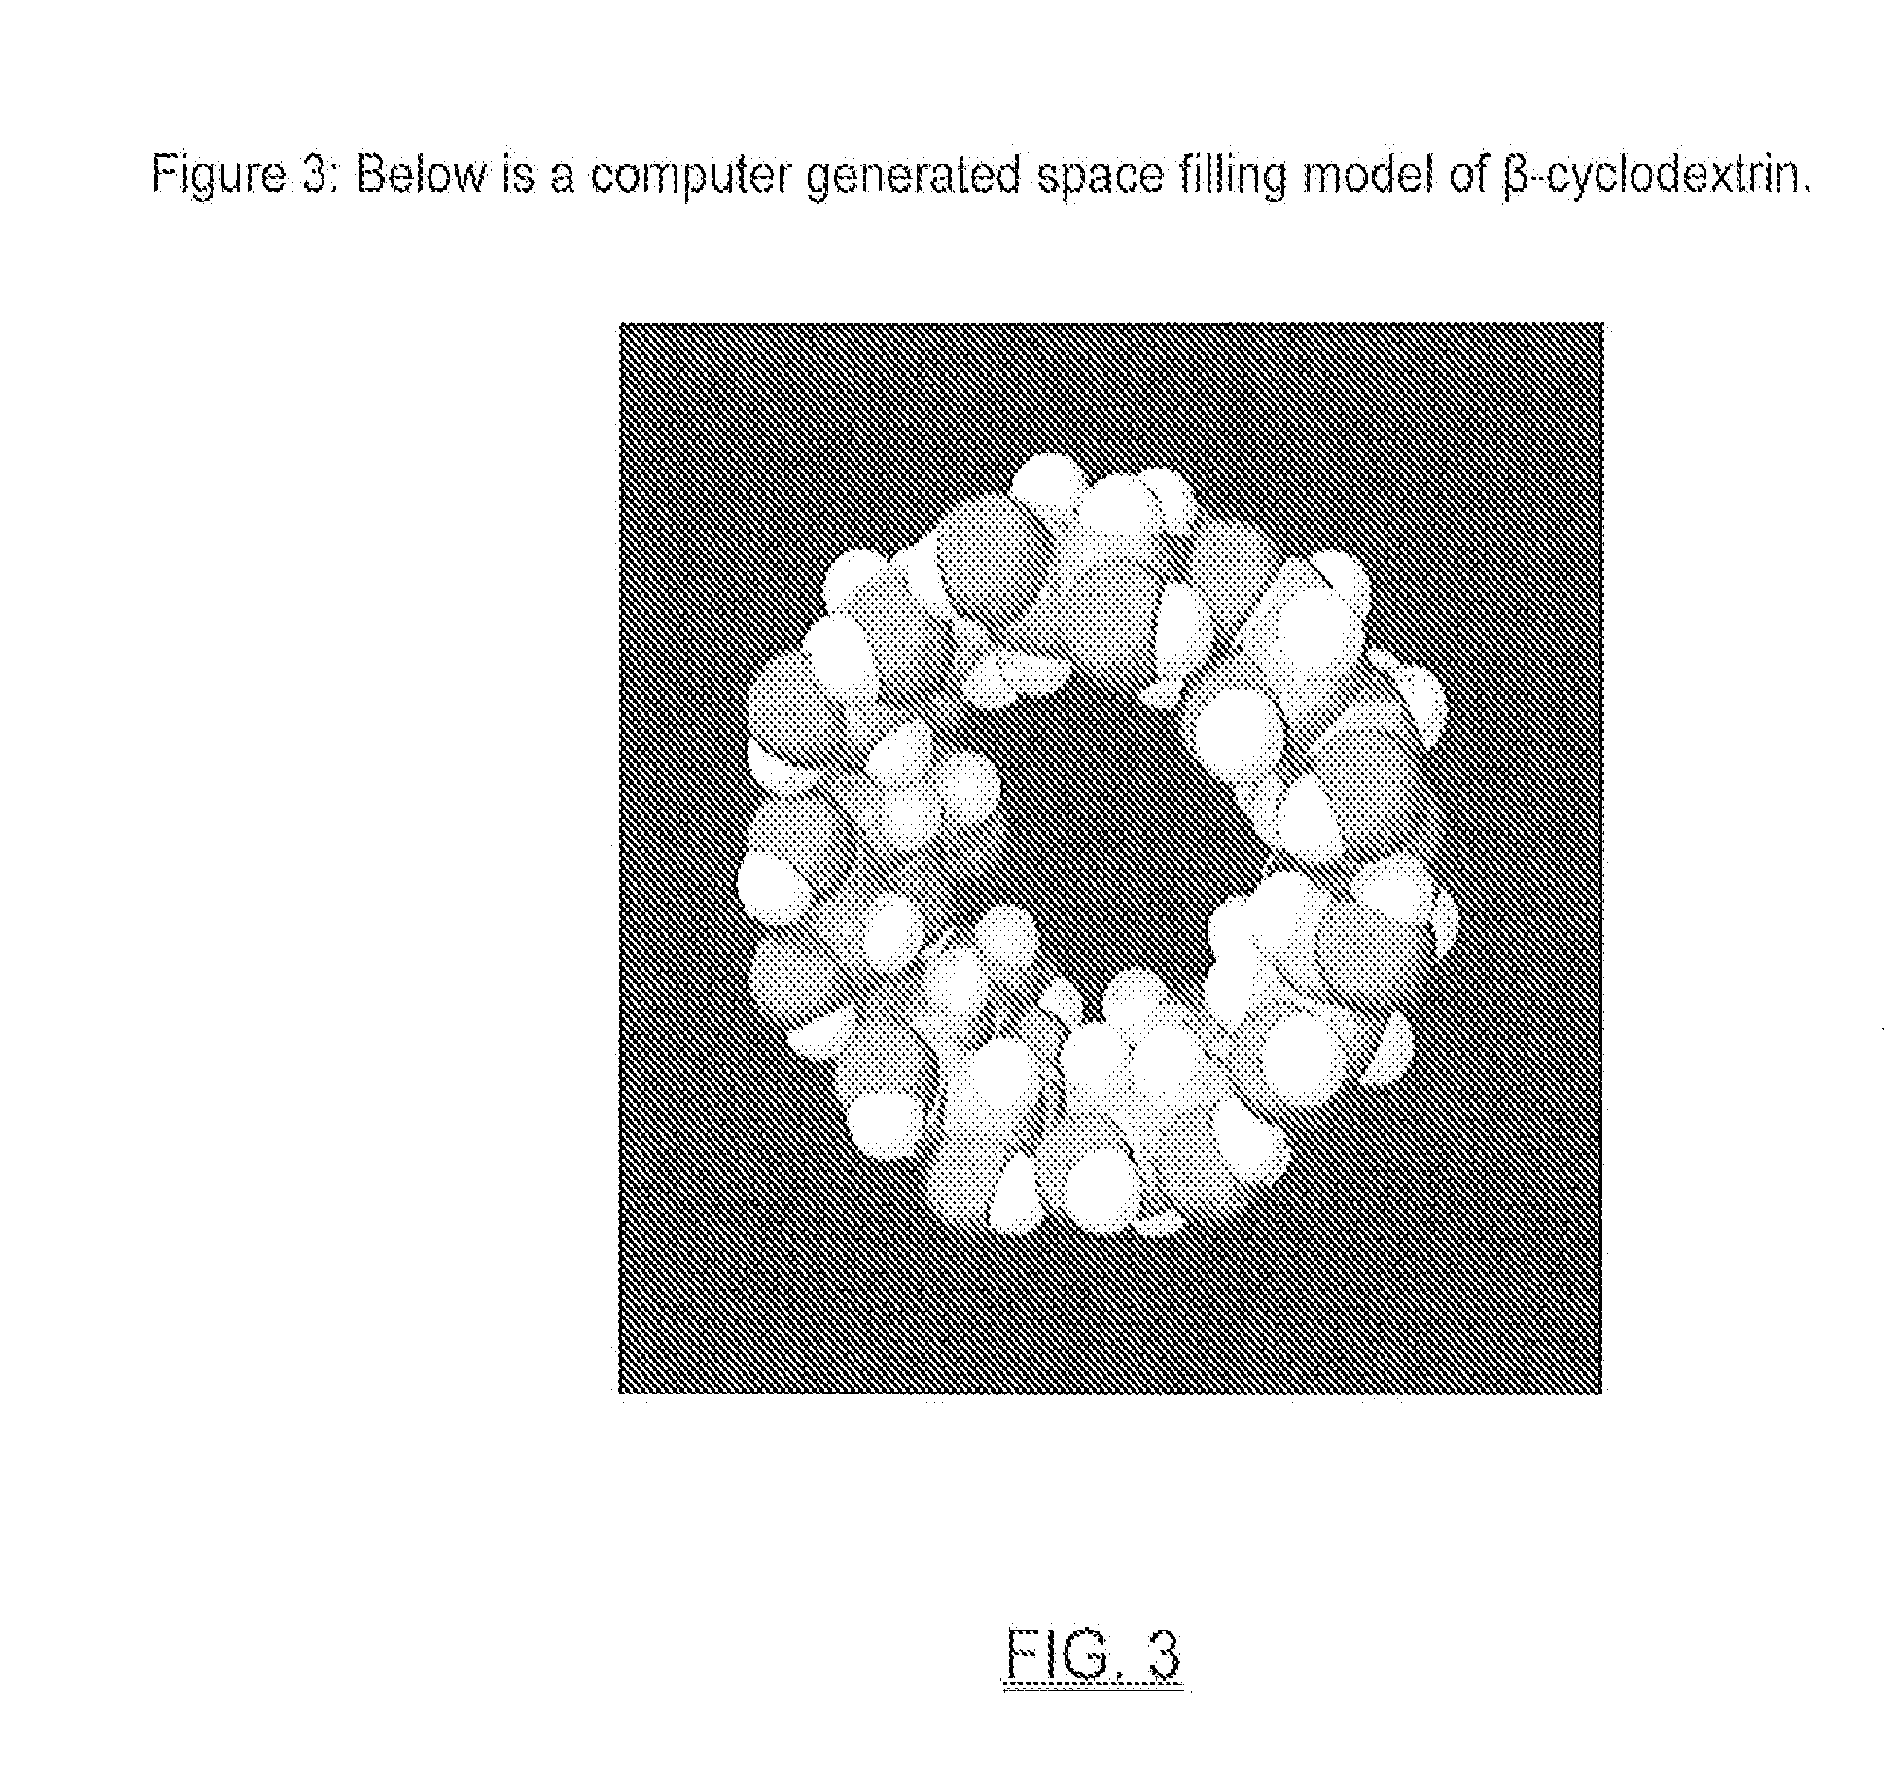 Self-assembled nano-structure particle and method for preparing